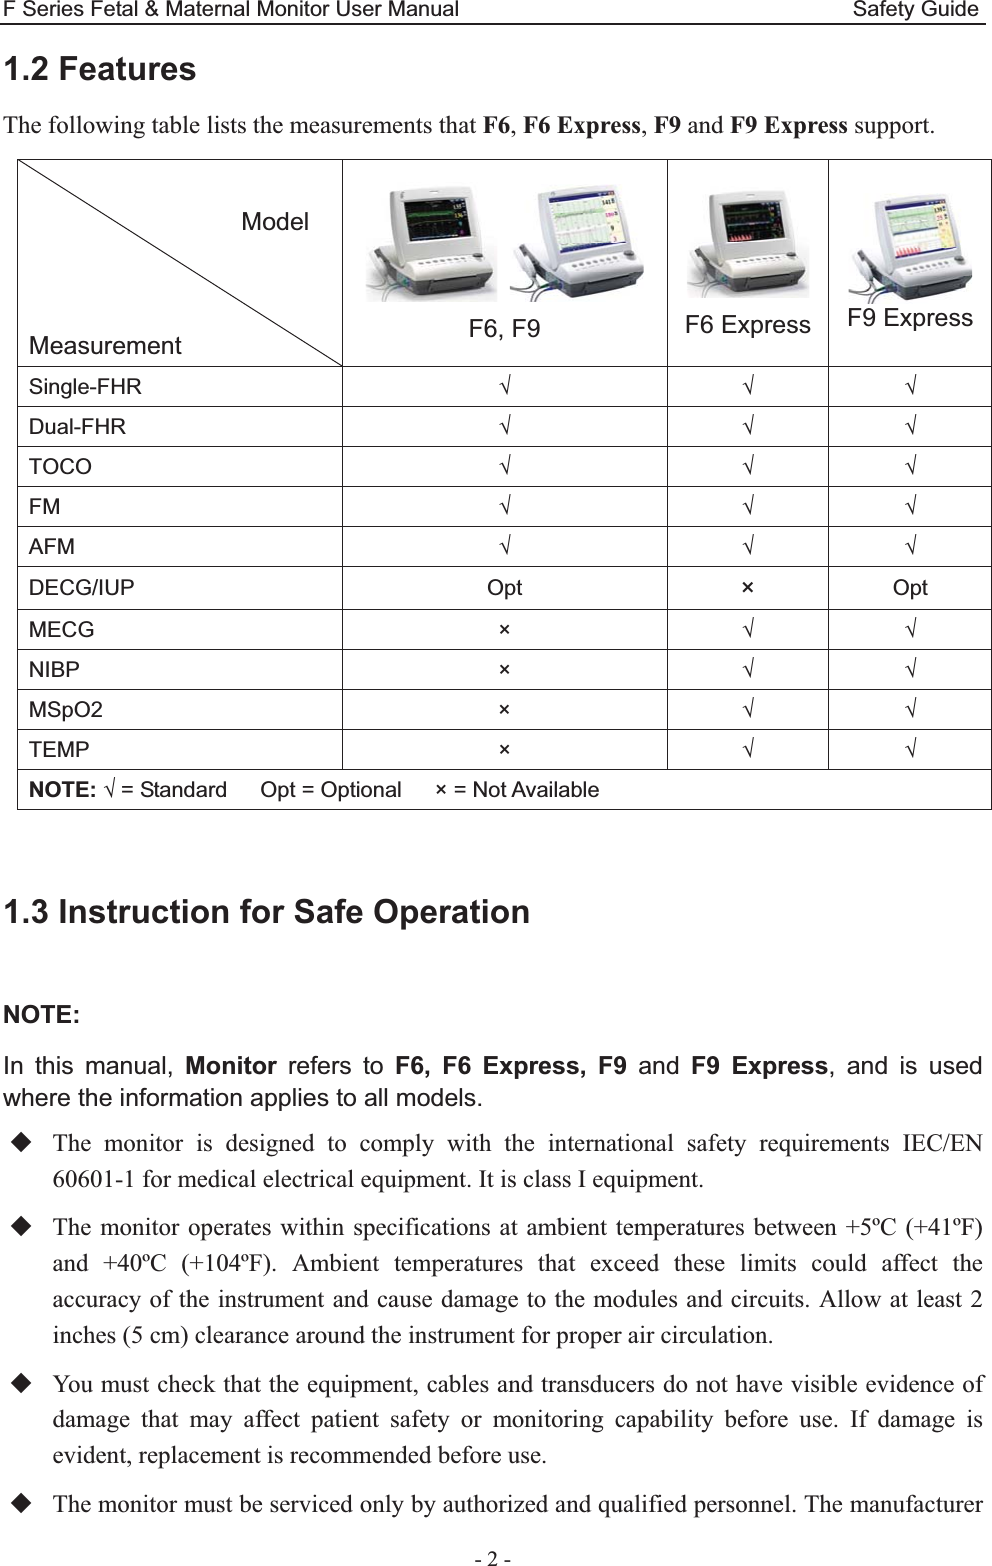 F Series Fetal &amp; Maternal Monitor User Manual                                    Safety Guide - 2 - 1.2 Features The following table lists the measurements that F6, F6 Express, F9 and F9 Express support.                                   Model   Measurement   F6, F9   F6 Express  F9 ExpressSingle-FHR ¥ ¥ ¥ Dual-FHR ¥ ¥ ¥ TOCO ¥ ¥ ¥ FM ¥ ¥ ¥ AFM ¥ ¥ ¥ DECG/IUP Opt × Opt MECG × ¥ ¥ NIBP × ¥ ¥ MSpO2 × ¥ ¥ TEMP × ¥ ¥ NOTE: ¥ = Standard      Opt = Optional      × = Not Available   1.3 Instruction for Safe Operation  NOTE:In this manual, Monitor refers to F6, F6 Express, F9 and F9 Express, and is used where the information applies to all models. The monitor is designed to comply with the international safety requirements IEC/EN 60601-1 for medical electrical equipment. It is class I equipment.  The monitor operates within specifications at ambient temperatures between +5ºC (+41ºF) and +40ºC (+104ºF). Ambient temperatures that exceed these limits could affect the accuracy of the instrument and cause damage to the modules and circuits. Allow at least 2 inches (5 cm) clearance around the instrument for proper air circulation.  You must check that the equipment, cables and transducers do not have visible evidence of damage that may affect patient safety or monitoring capability before use. If damage is evident, replacement is recommended before use.  The monitor must be serviced only by authorized and qualified personnel. The manufacturer 